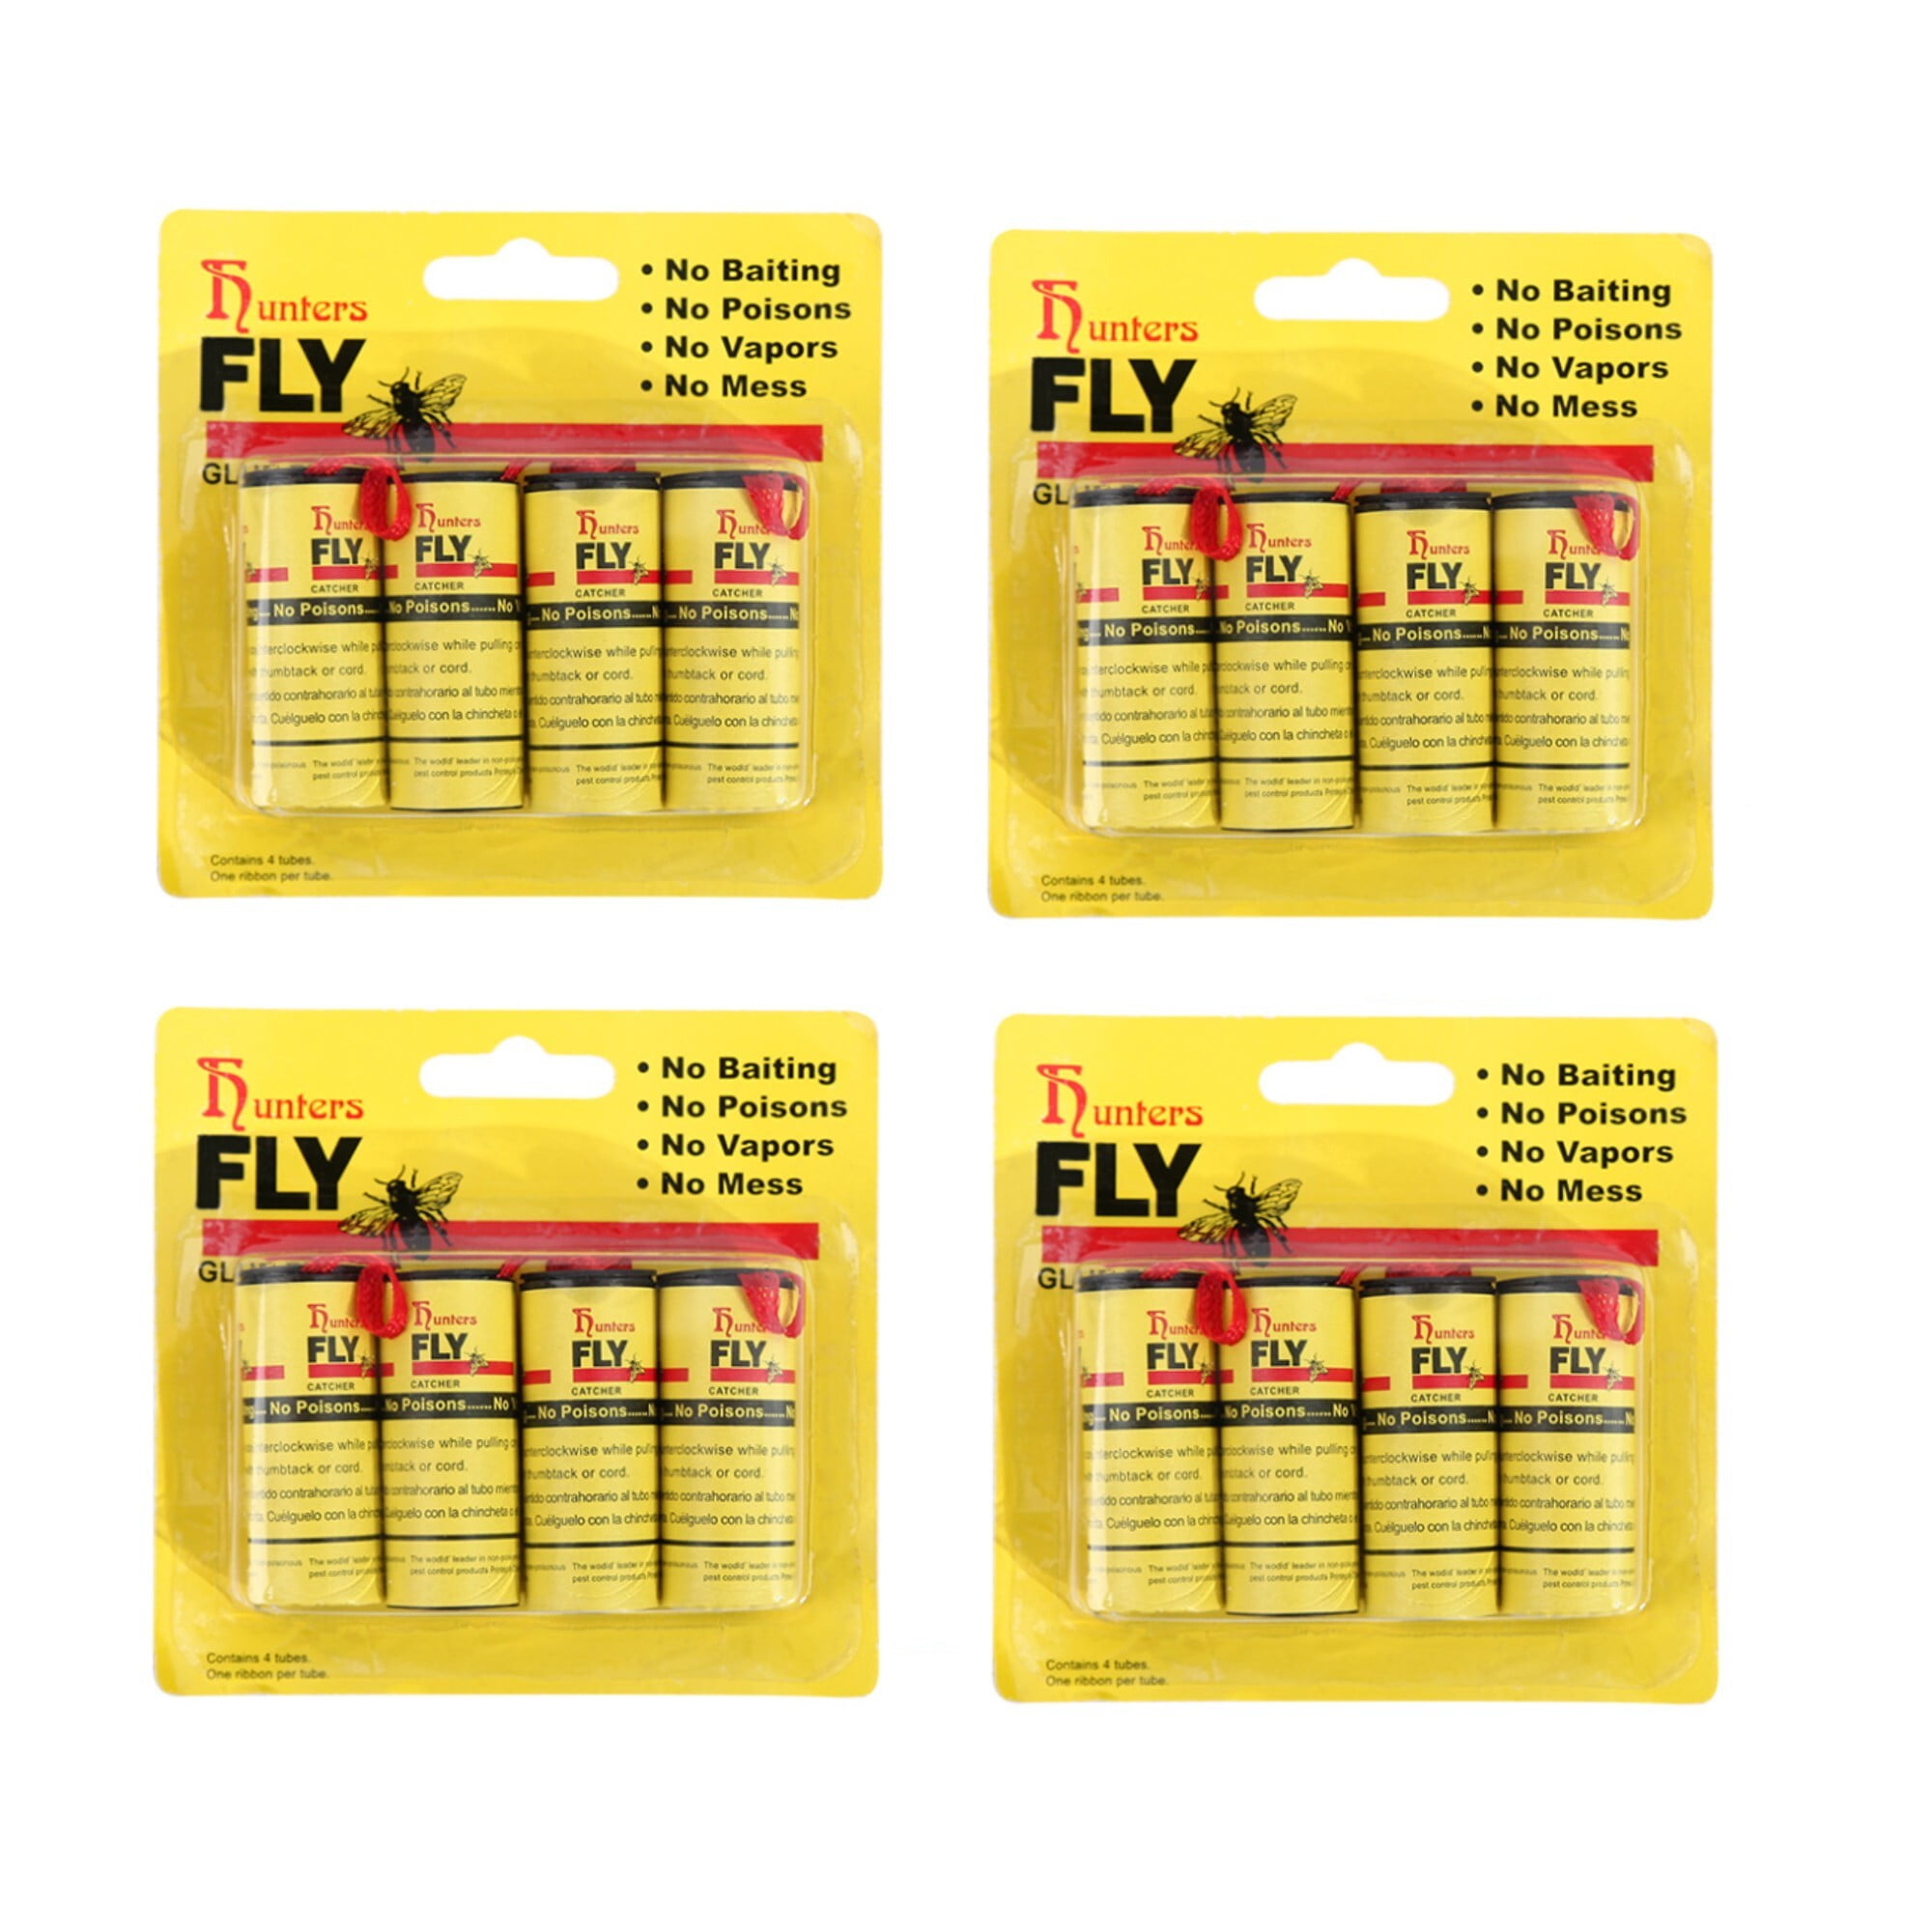 NOGIS 16 Pcs Fly Strips Indoor Sticky Hanging with Pins. Fly Trap